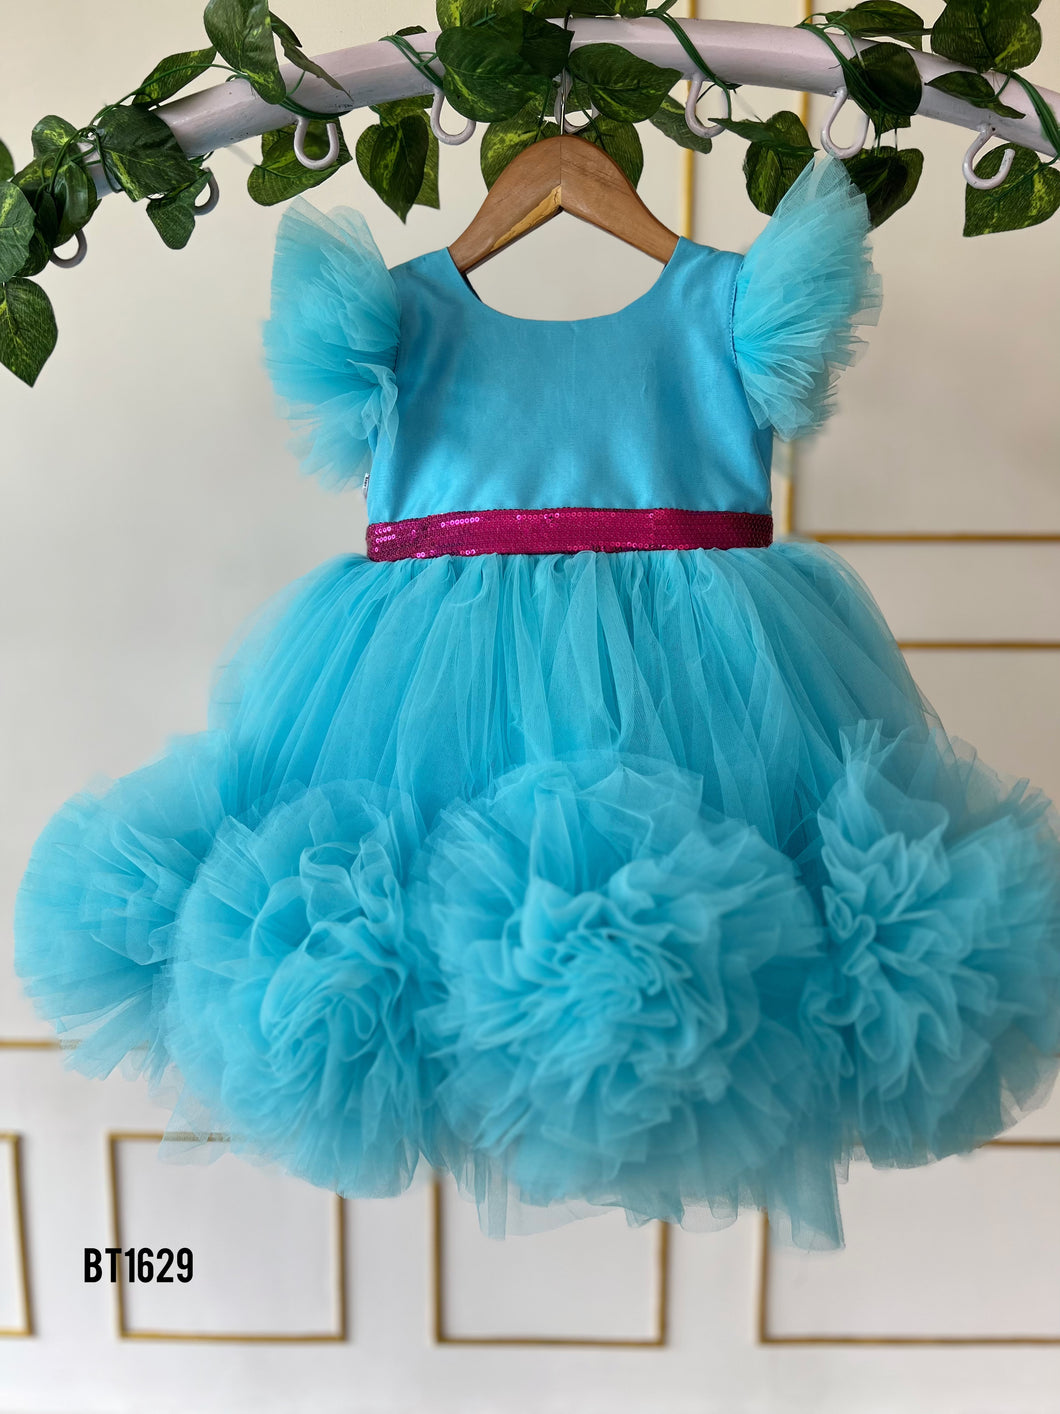 BT1629 Aquatic Whimsy: A Tulle Dream in Ocean Blue for Little Darlings